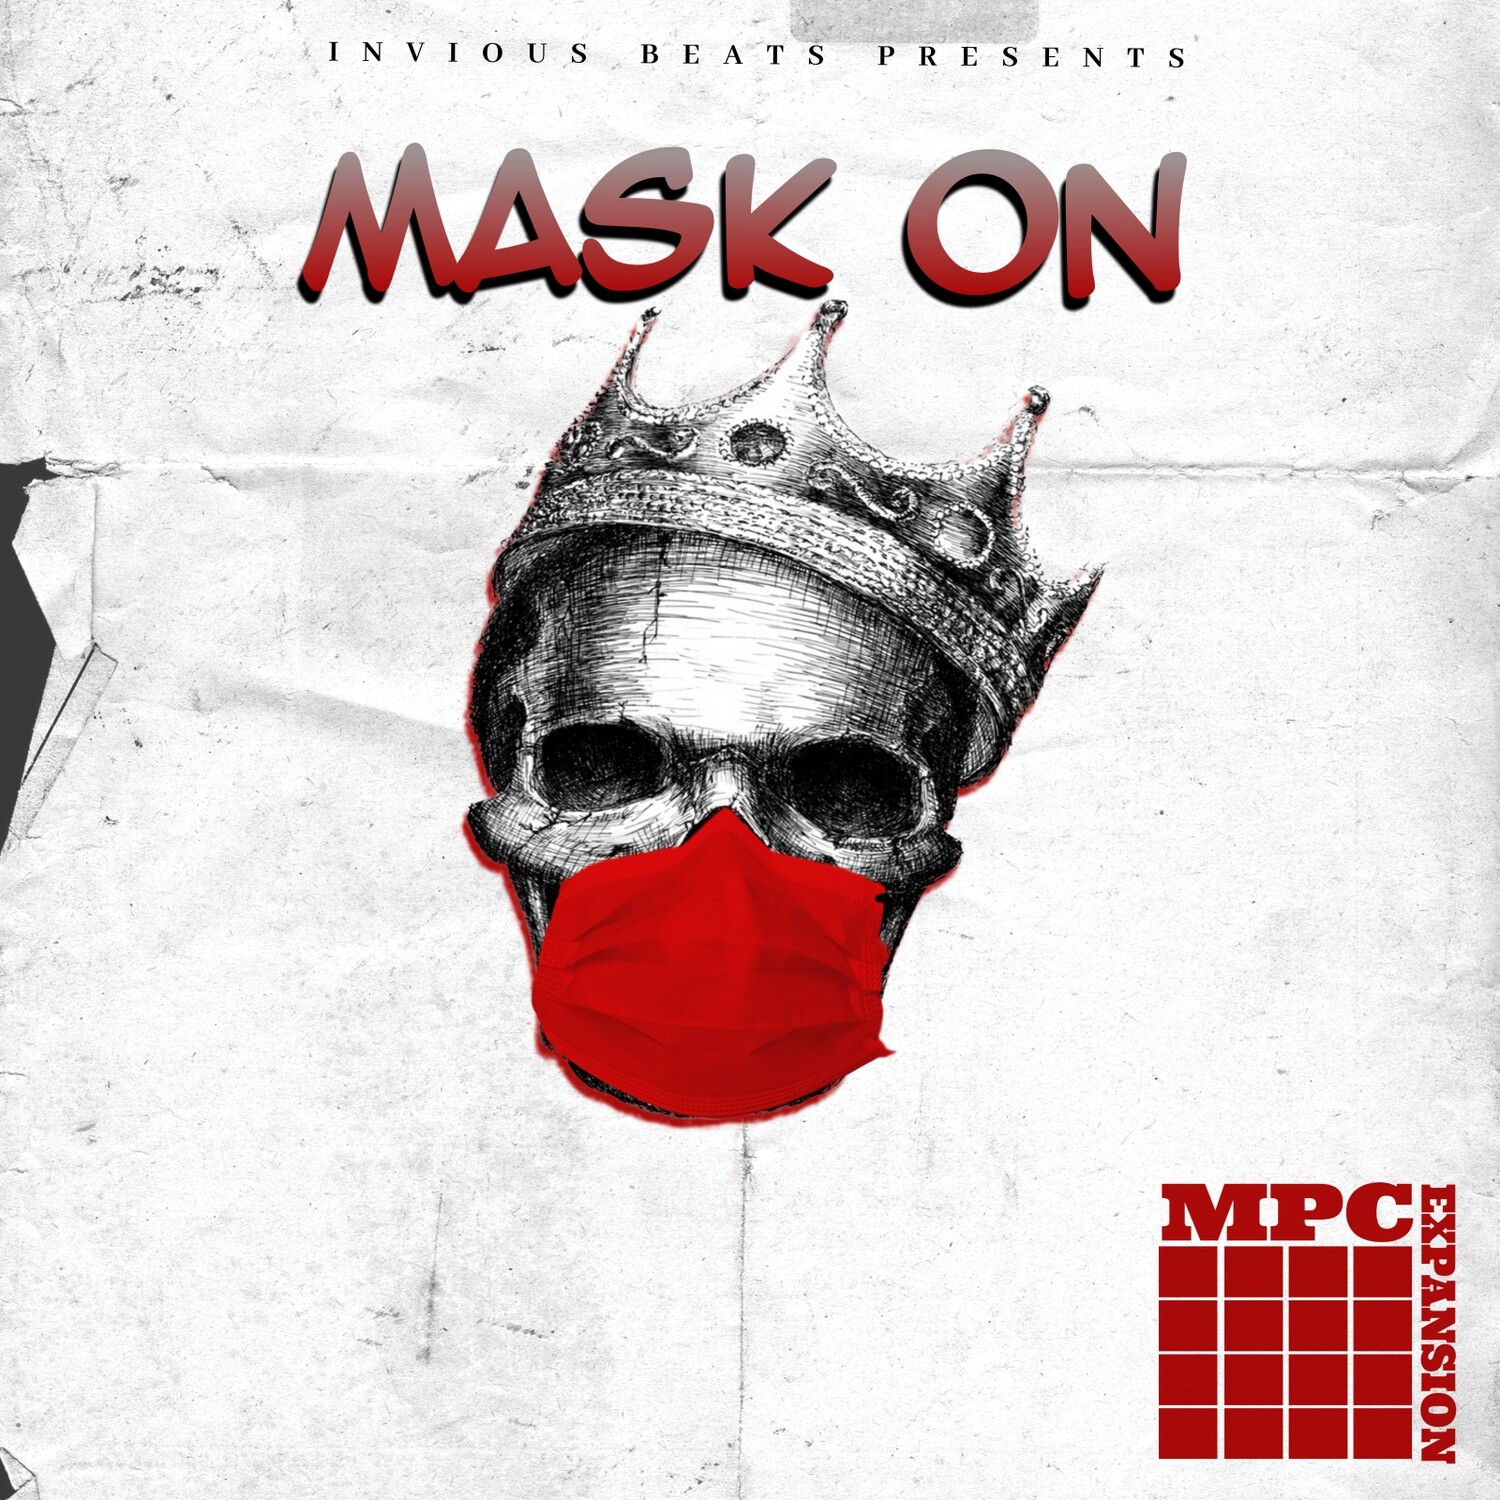 MPC EXPANSION "MASK ON" by INVIOUS